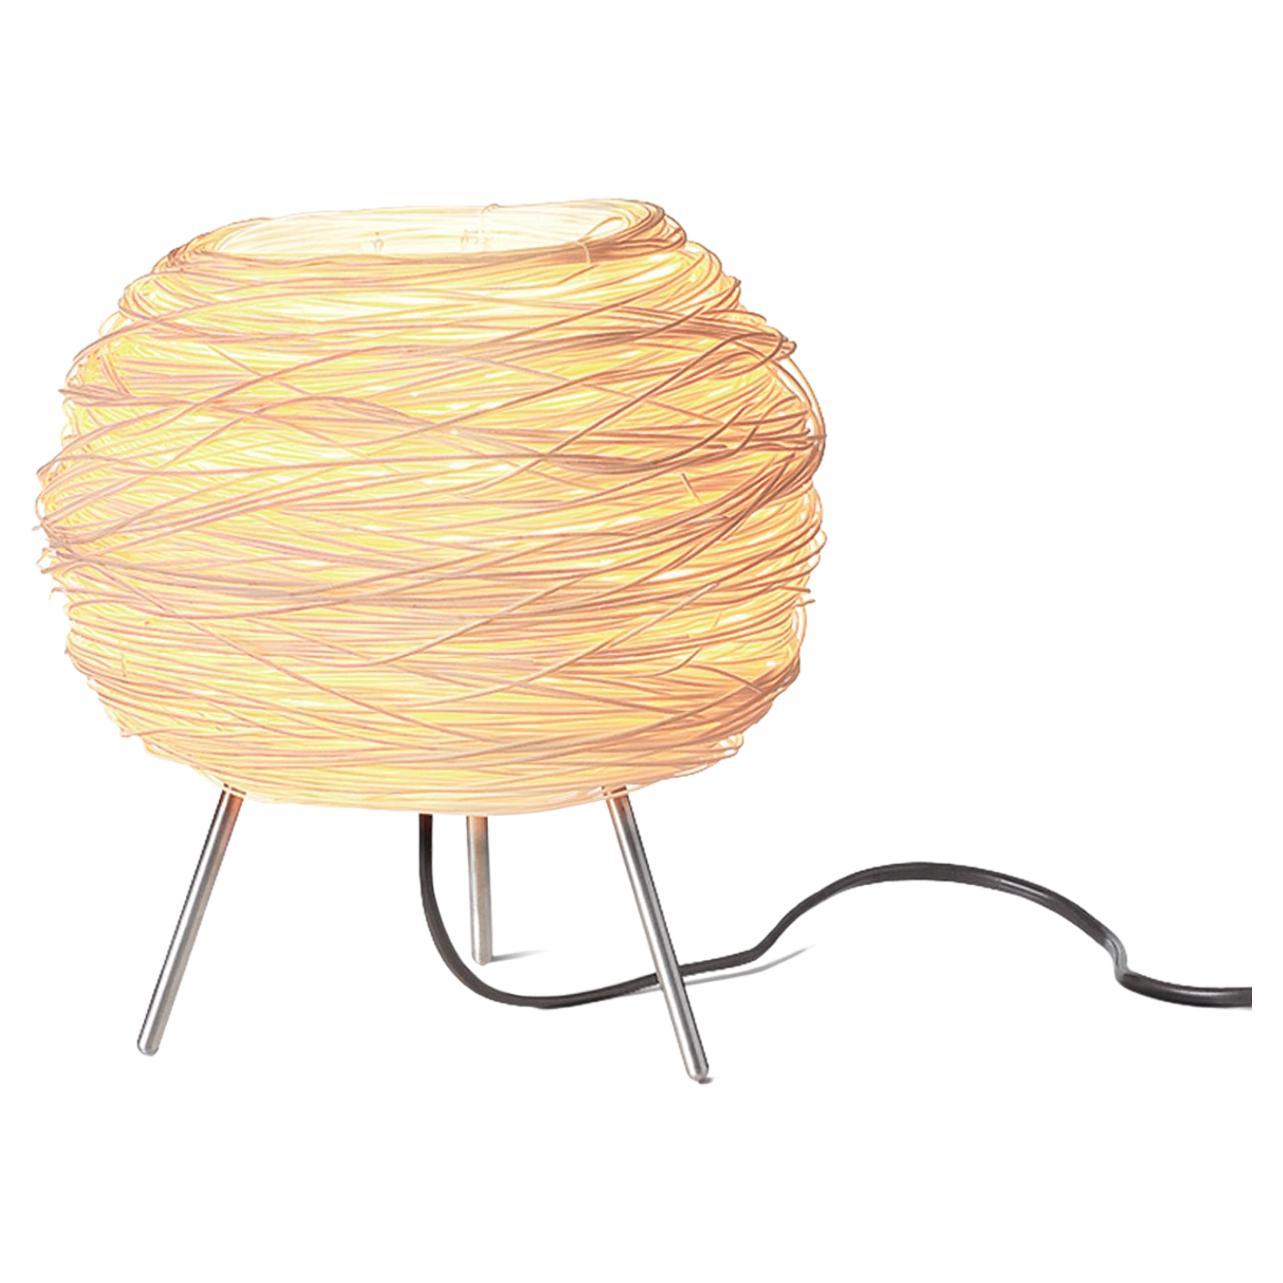 JR Nest by Ango, Handcrafted Rattan Table Light 